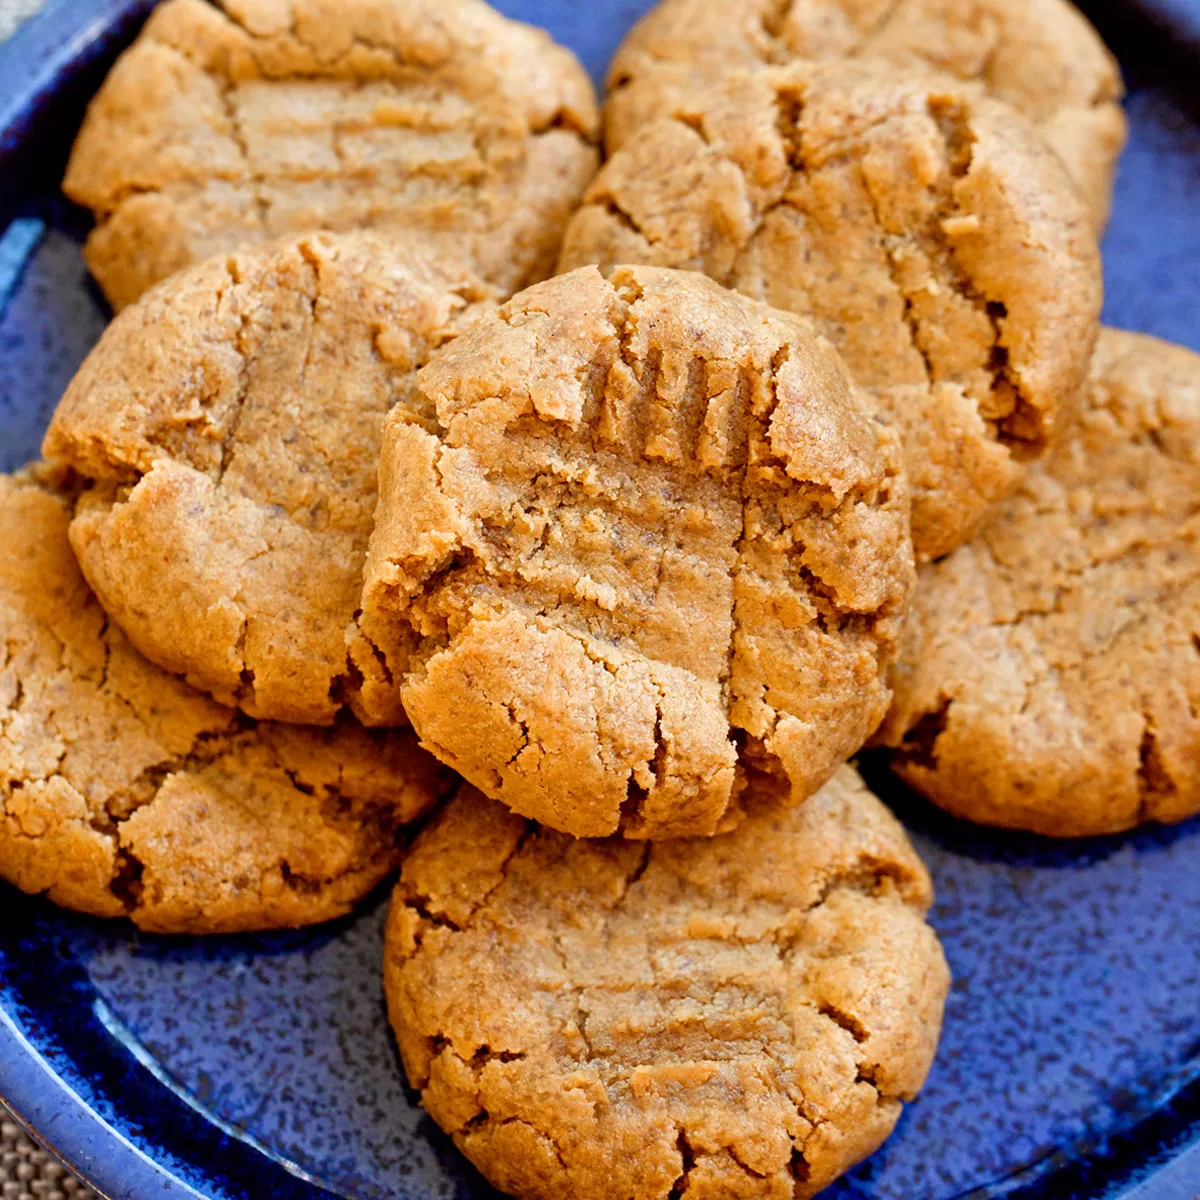 Peanut Butter Cookies - Will Cook For Smiles